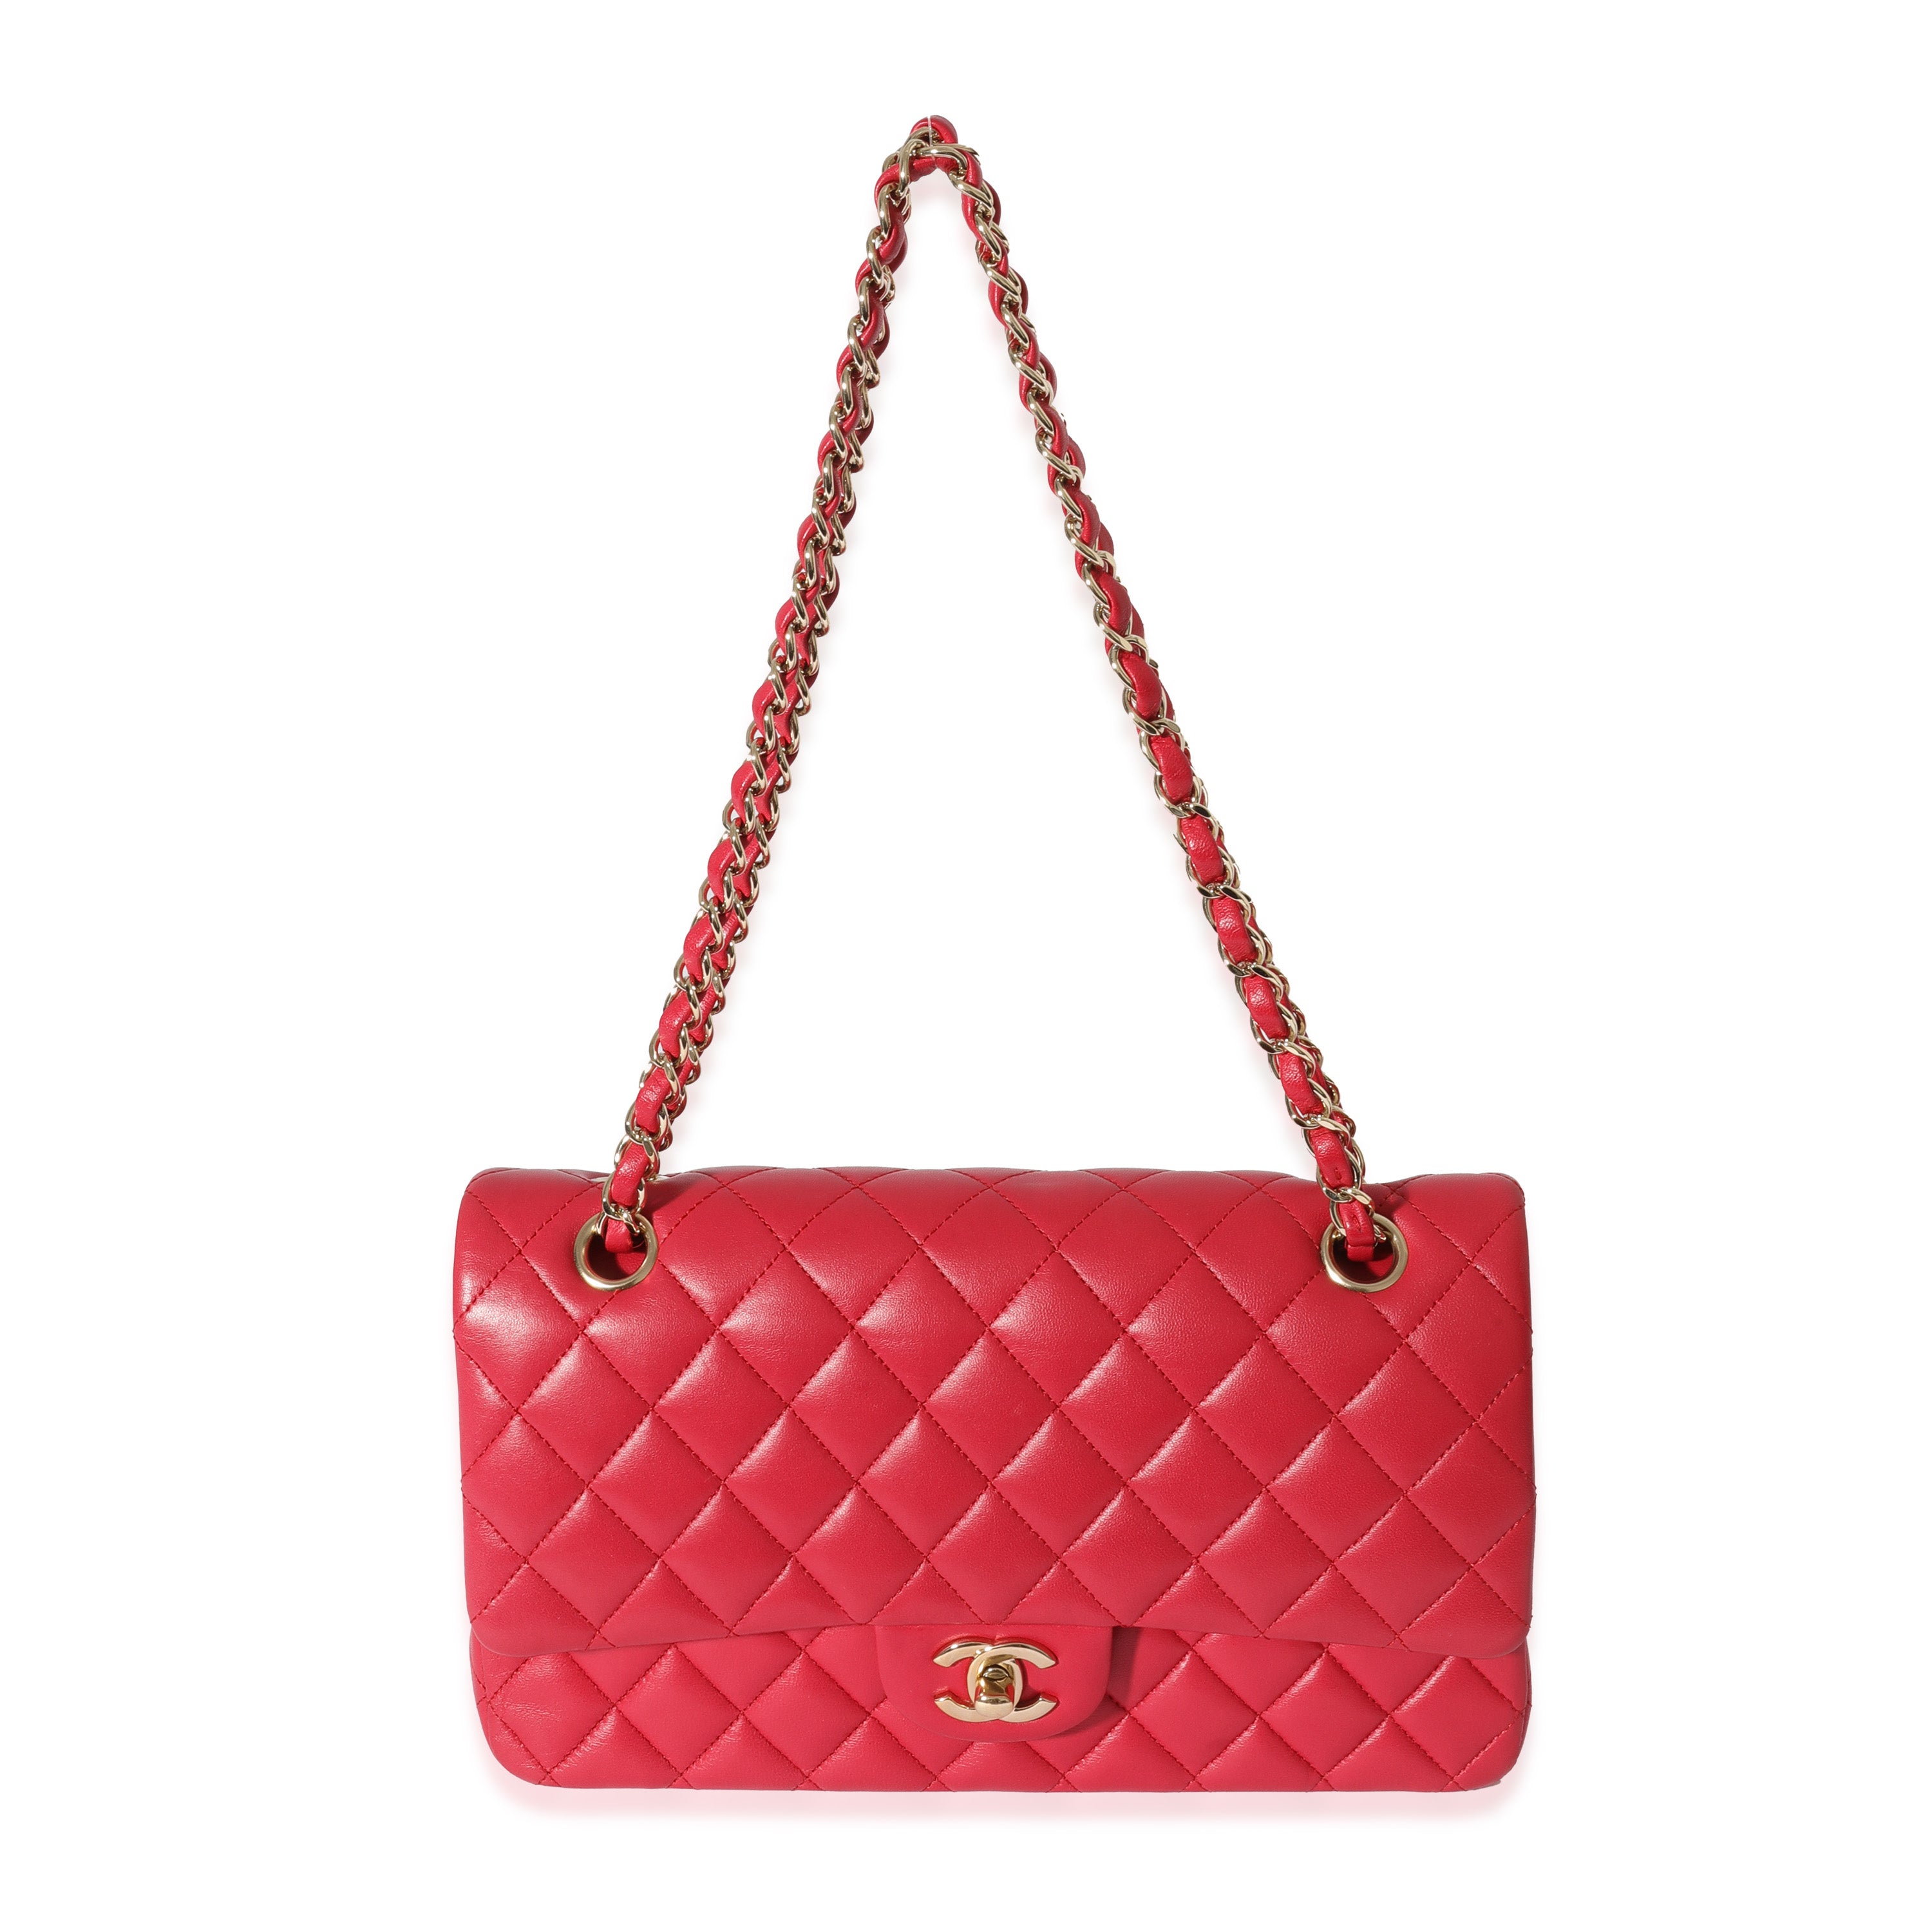 Chanel Red Quilted Leather Medium Classic Double Flap Shoulder Bag